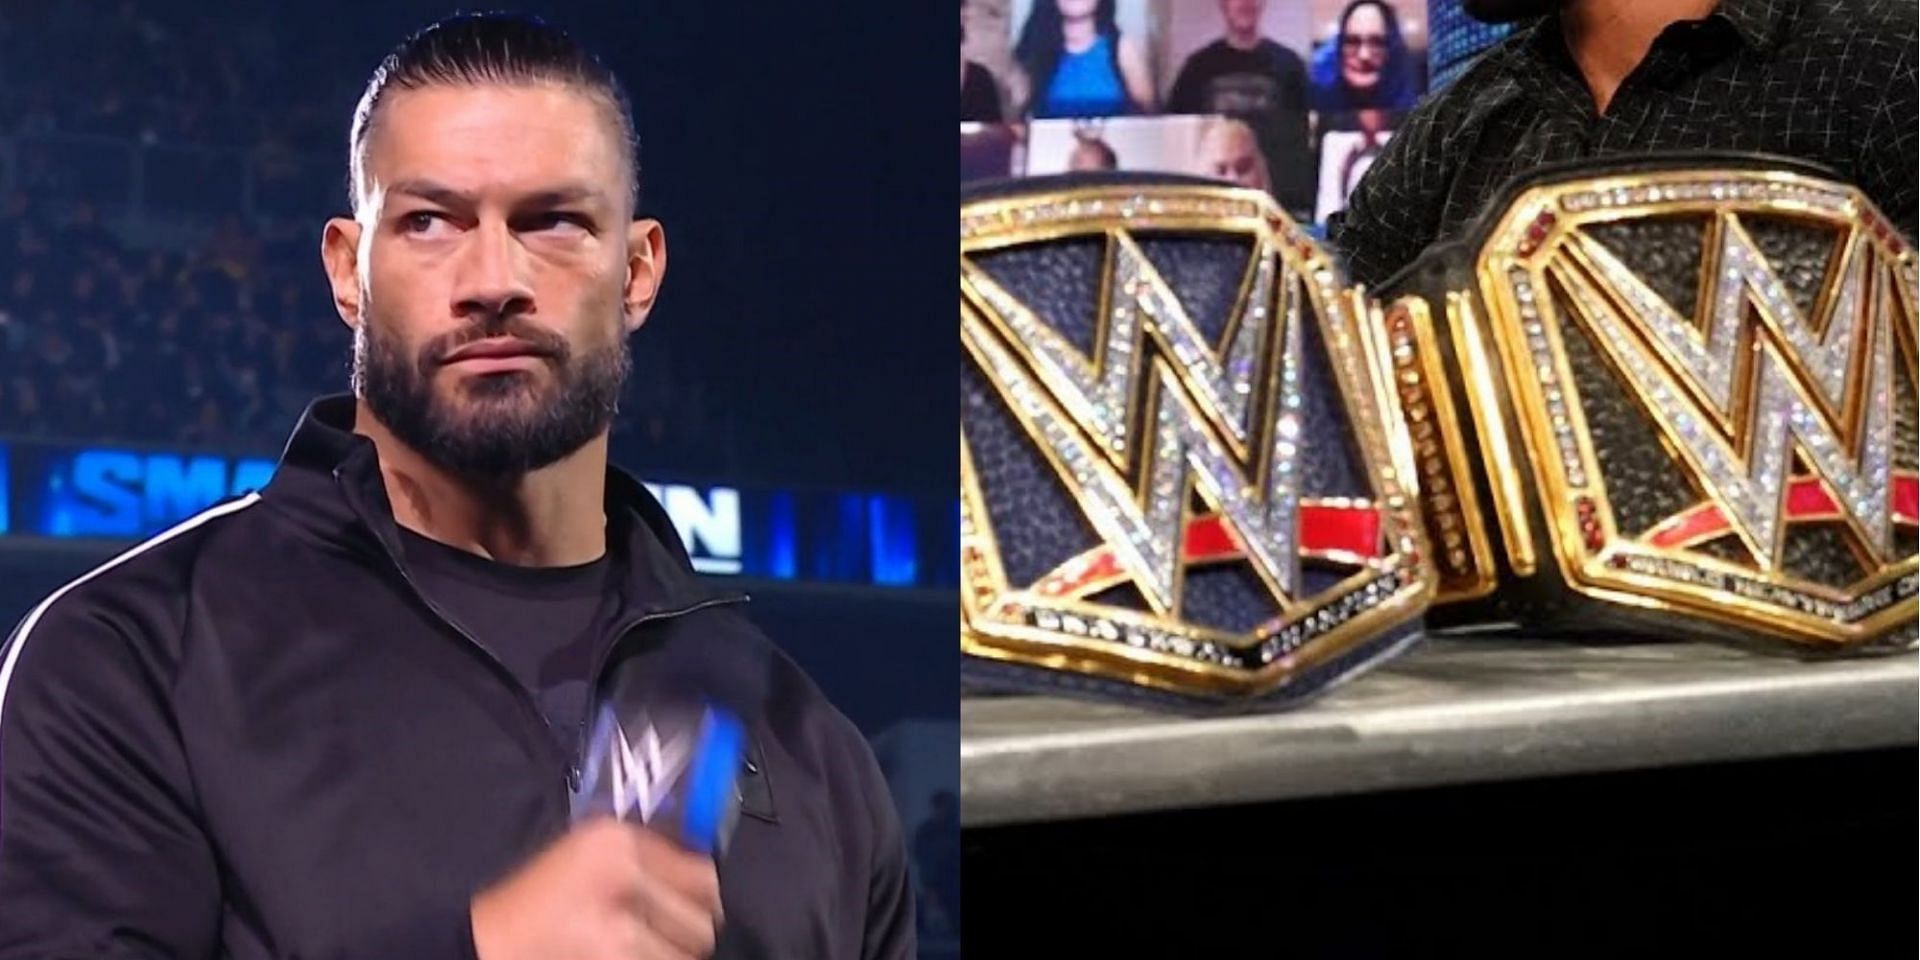 Roman Reigns is the current WWE Undisputed Universal Champion